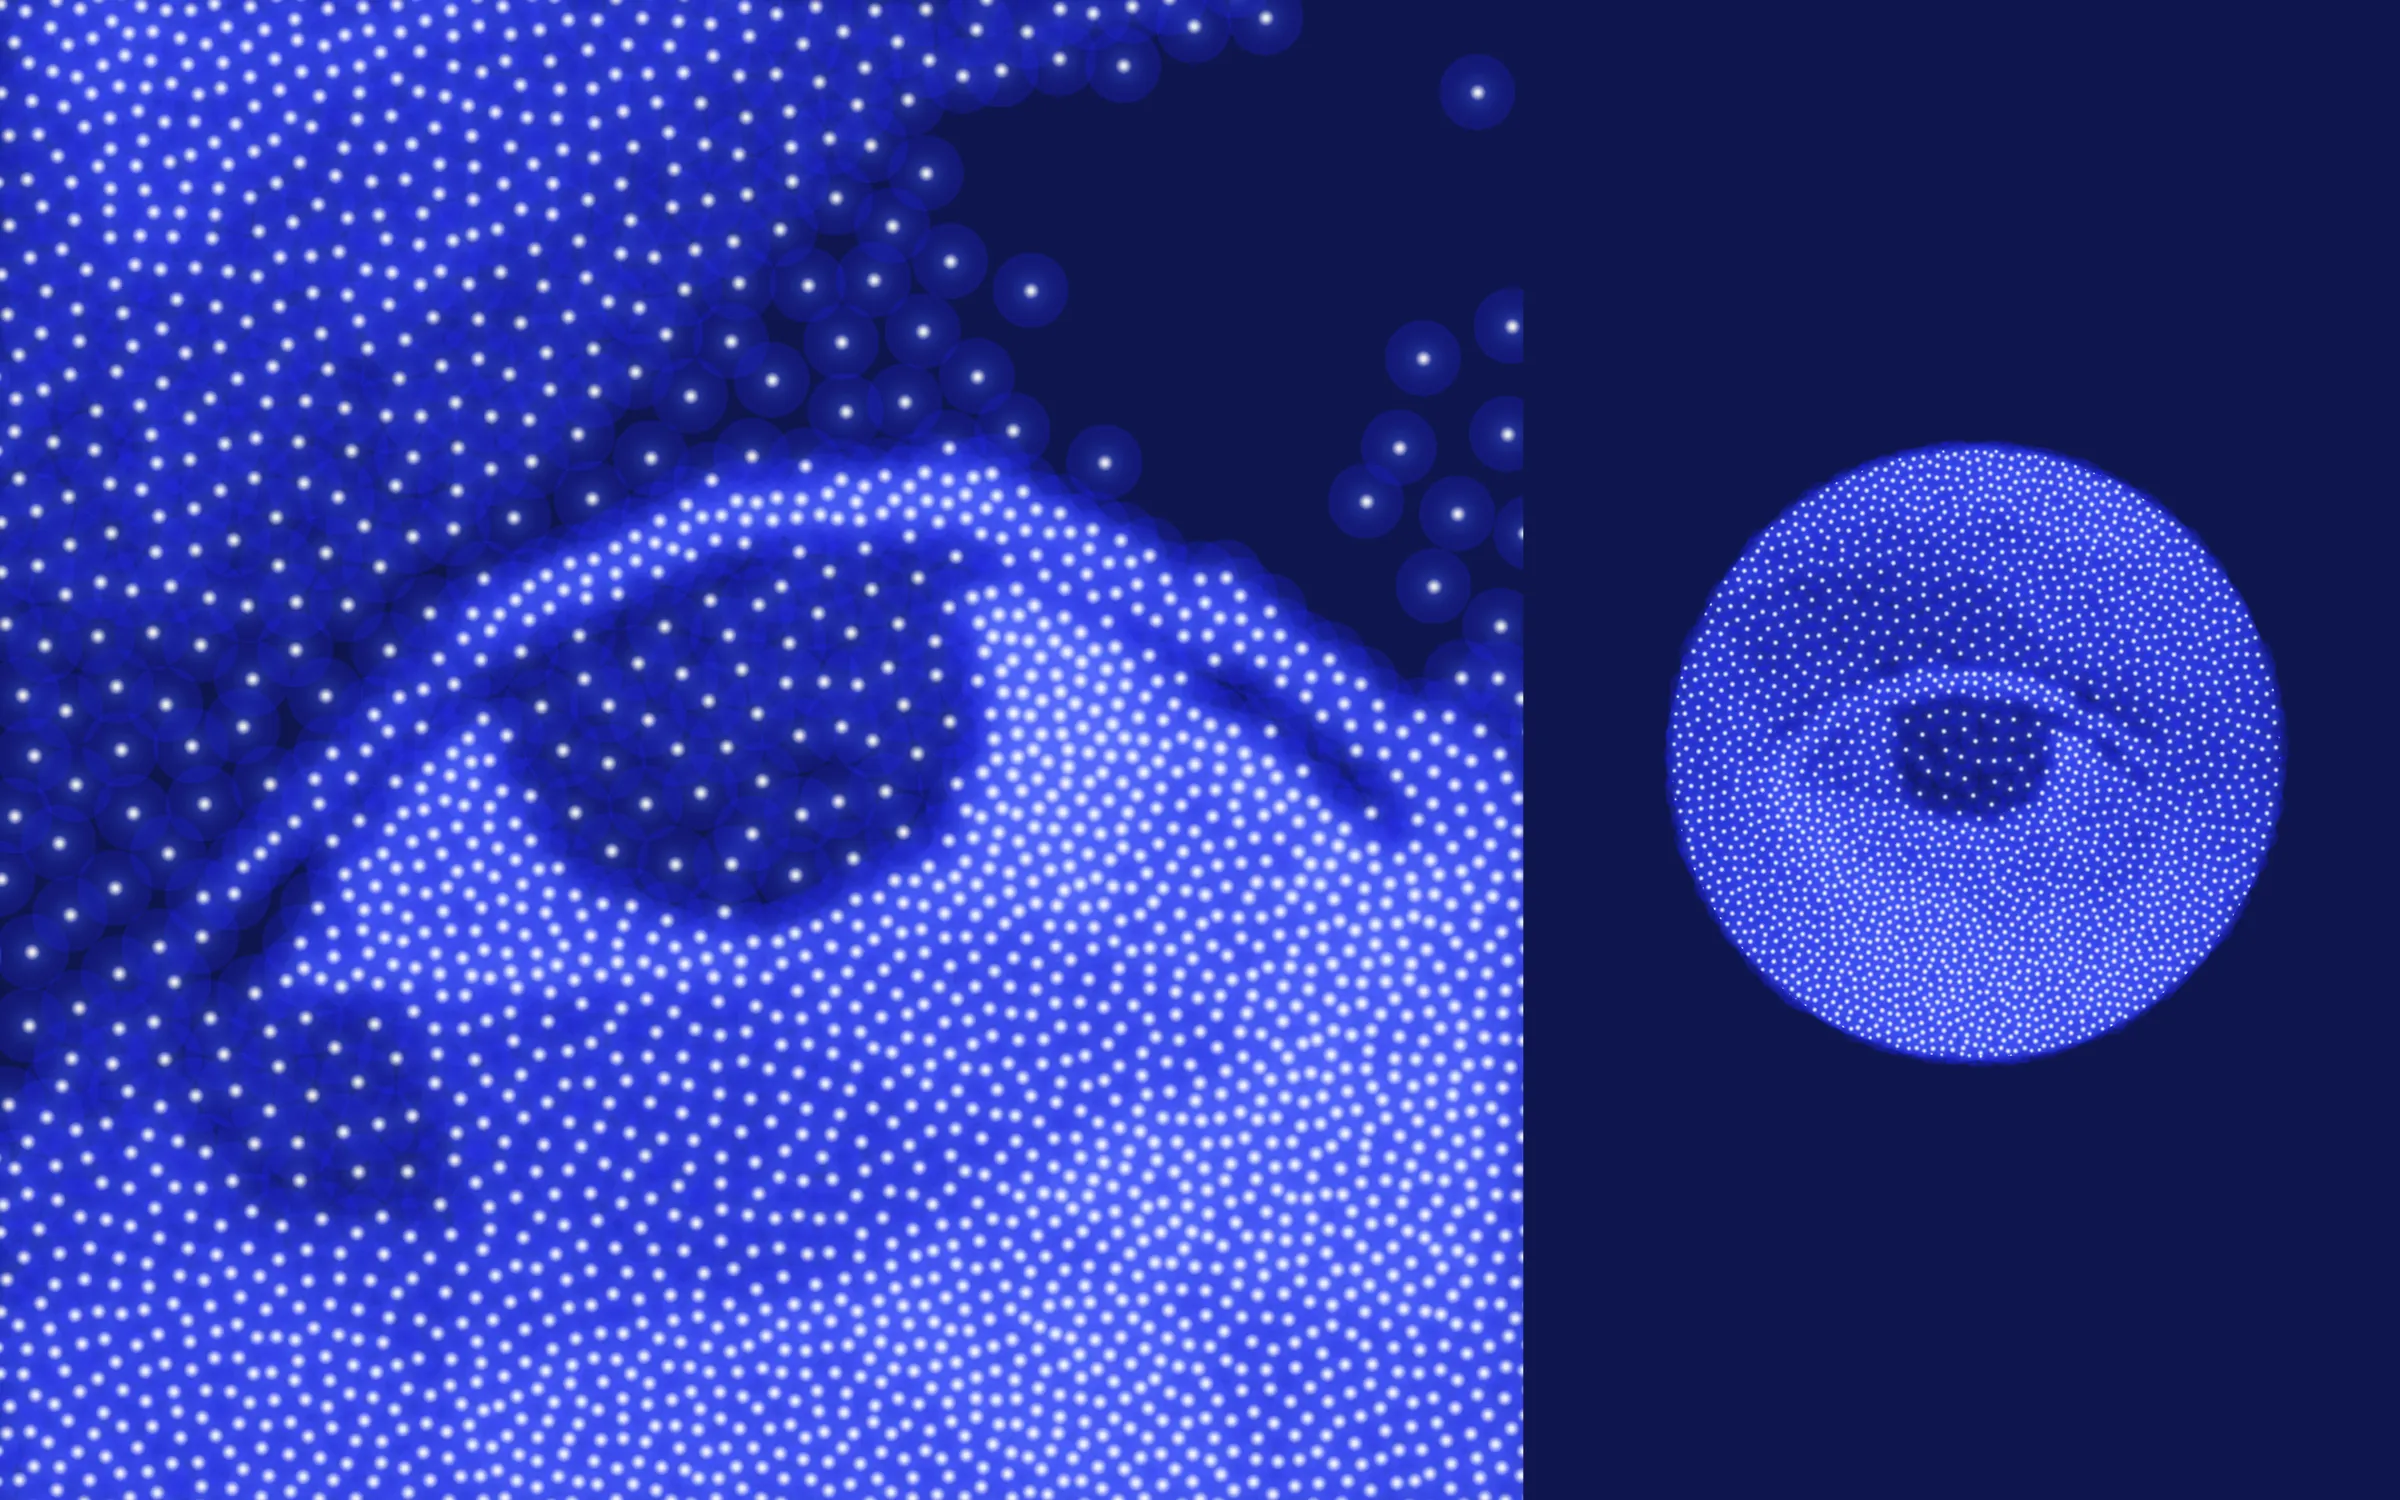 on-the-left-is-a-large-illustration-showing-an-eye-made-of-many-dots-on-the-right-is-a-smaller-illustration-of-an-eye-made-of-m